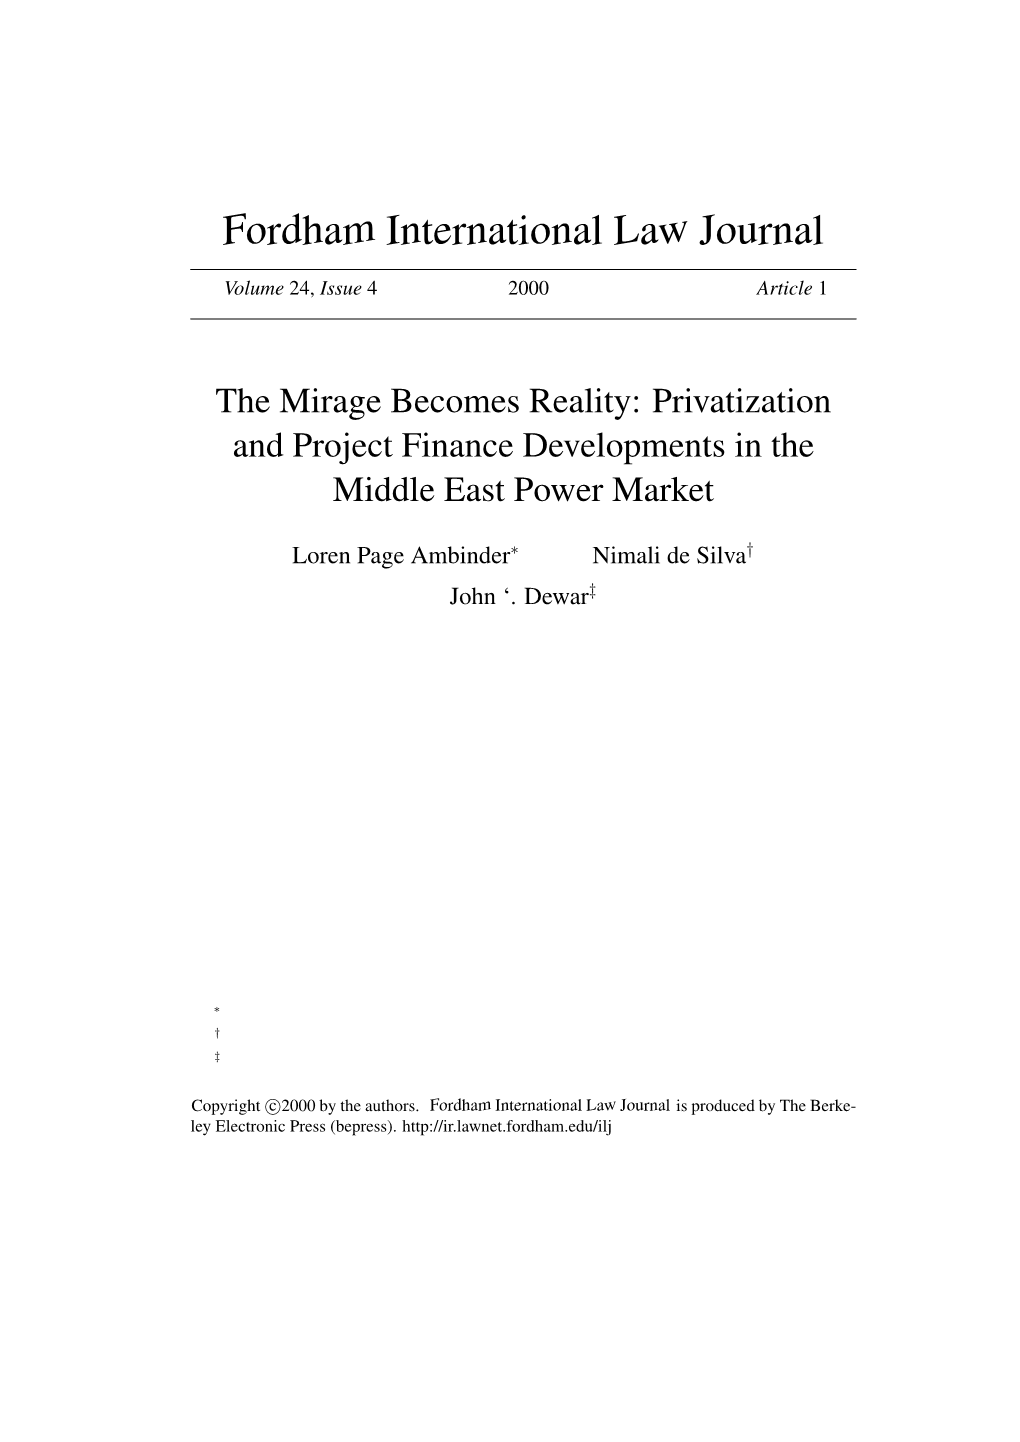 The Mirage Becomes Reality: Privatization and Project Finance Developments in the Middle East Power Market